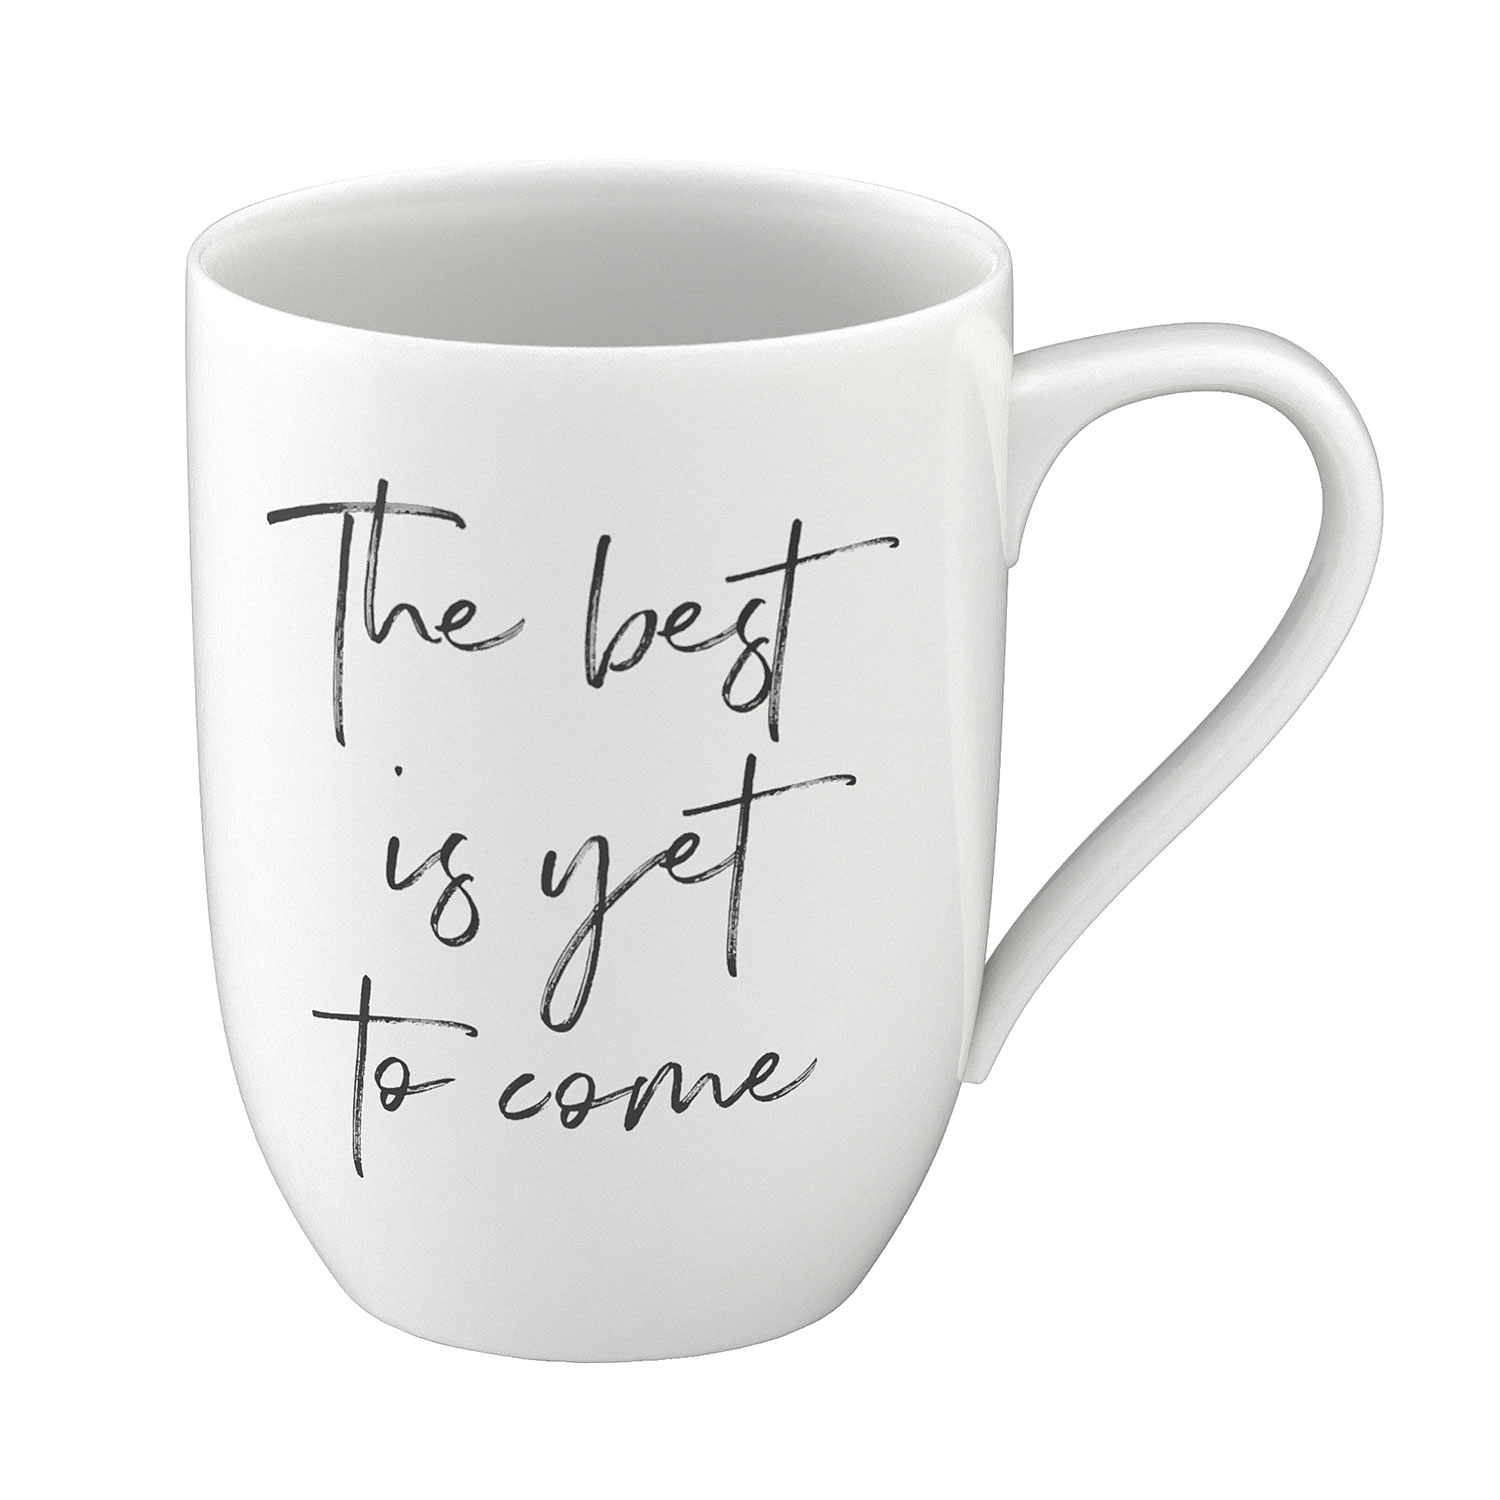 Statement Mug Кружка "The best yet to come"